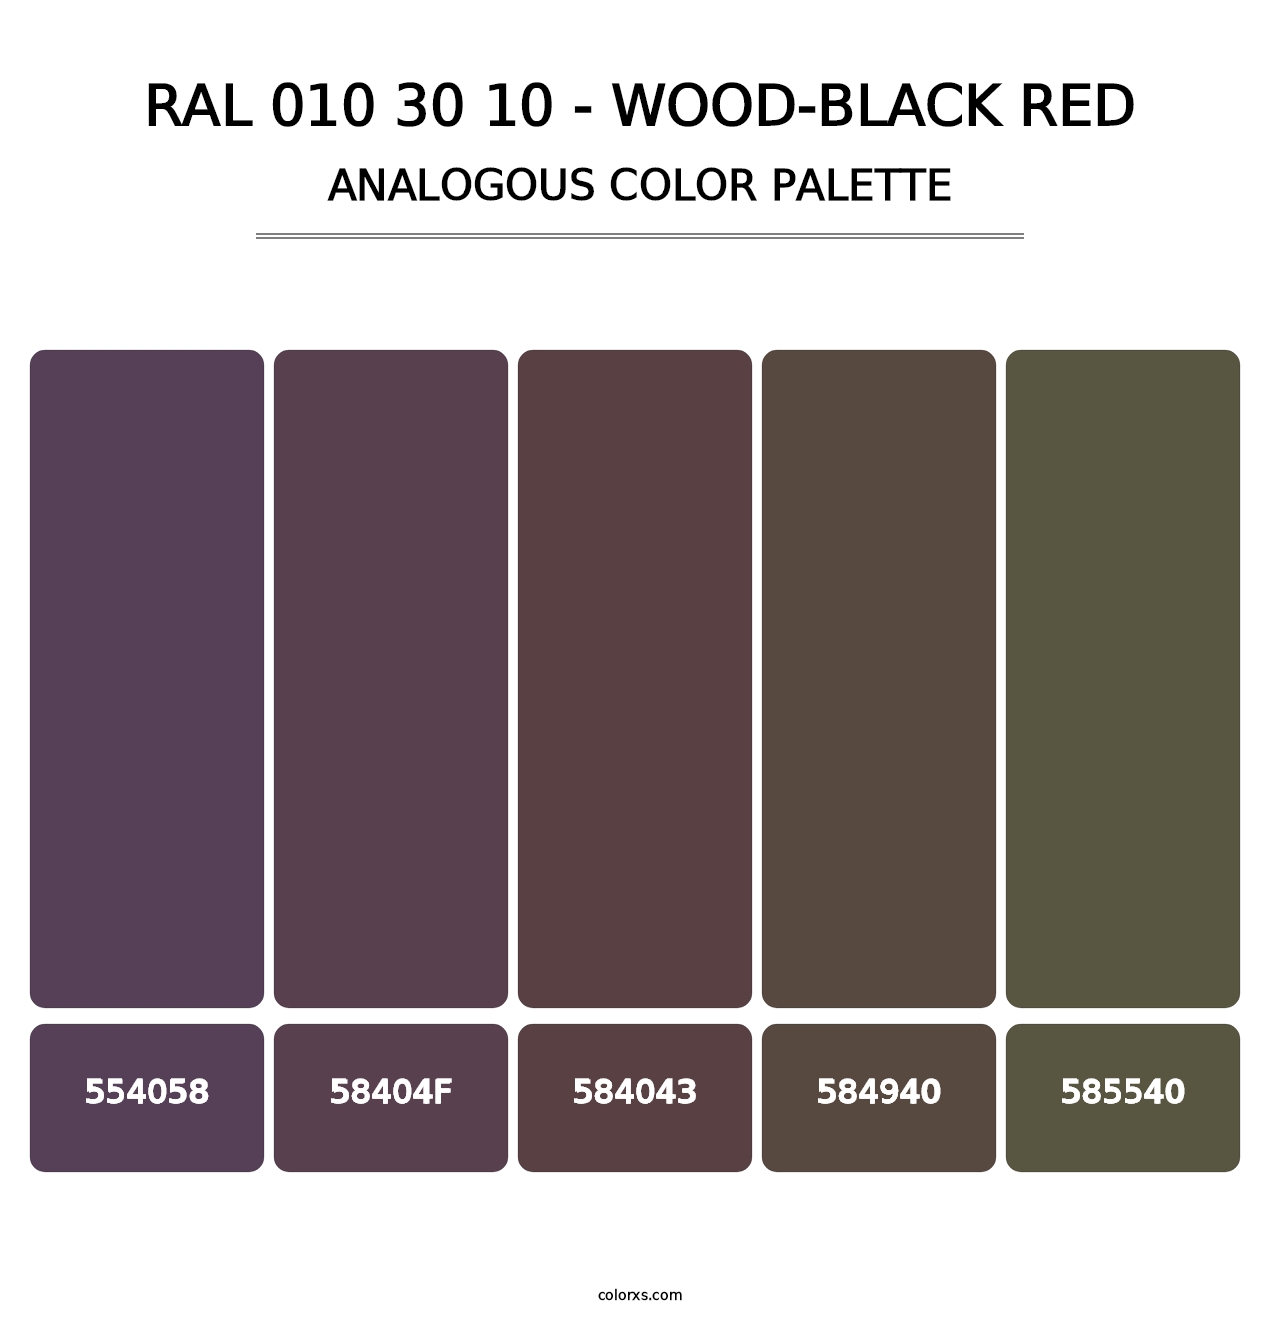 RAL 010 30 10 - Wood-Black Red - Analogous Color Palette